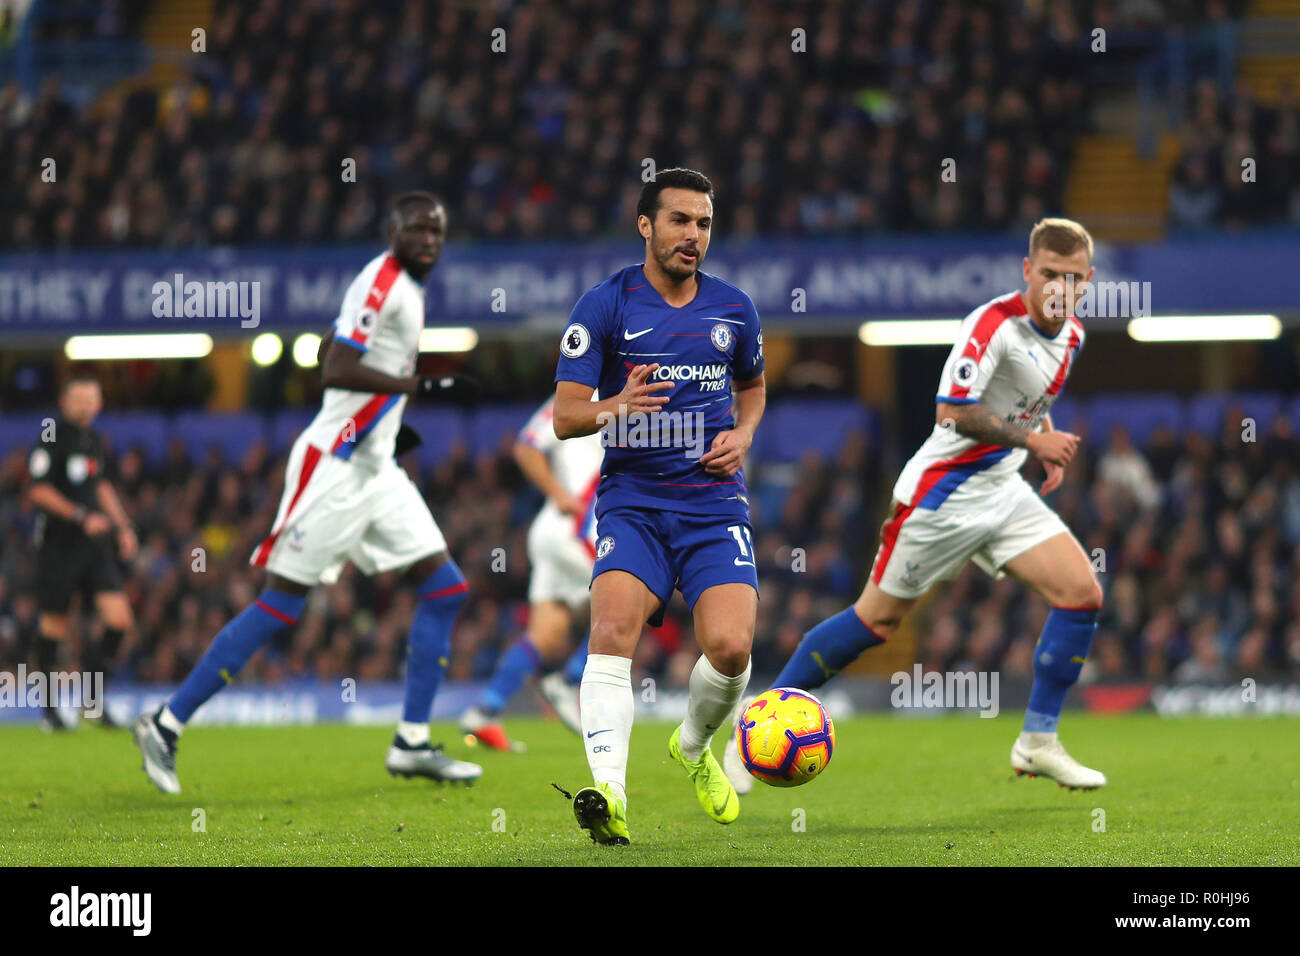 Pedro of Chelsea - Chelsea v Crystal Palace, Premier League, Stamford Bridge, London - 4th November 2018  STRICTLY EDITORIAL USE ONLY - DataCo rules apply - The use of this image in a commercial context is strictly prohibited unless express permission has been given by the club(s) concerned. Examples of commercial usage include, but are not limited to, use in betting and gaming, marketing and advertising products. No use with unauthorised audio, video, data, fixture lists, club and or league logos or services including those listed as 'live' Stock Photo